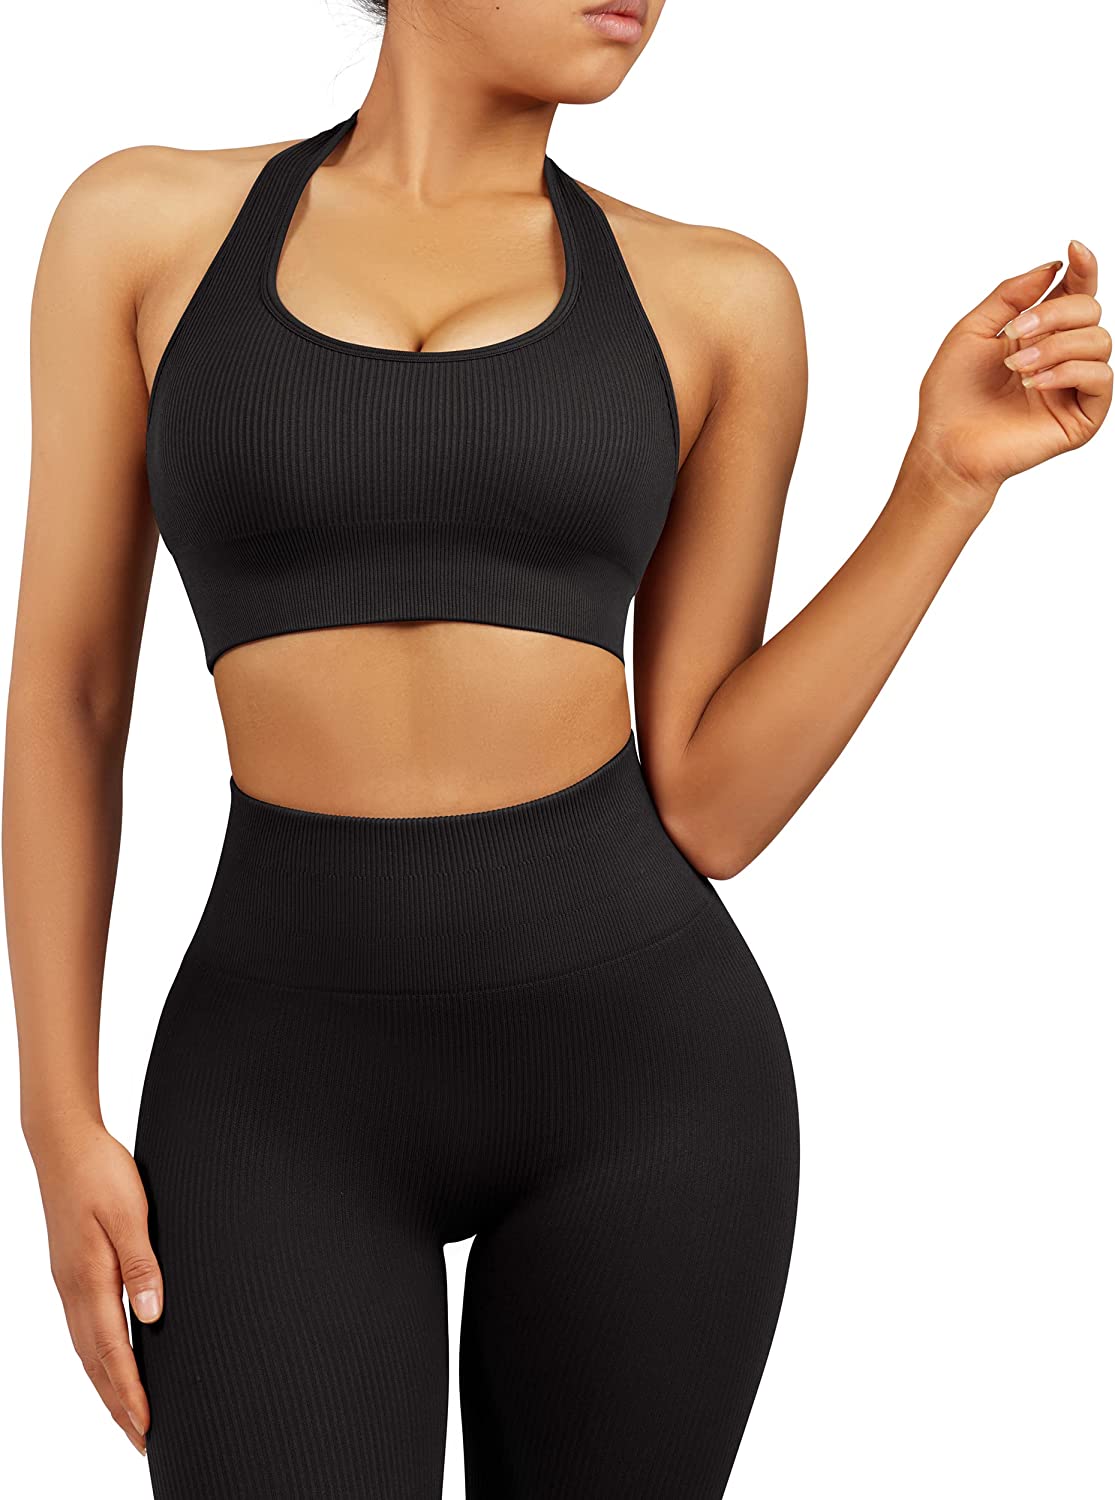 RUUHEE Workout Sets for Women Seamless 2 Piece Outfits Strap Sports Bra  Matching